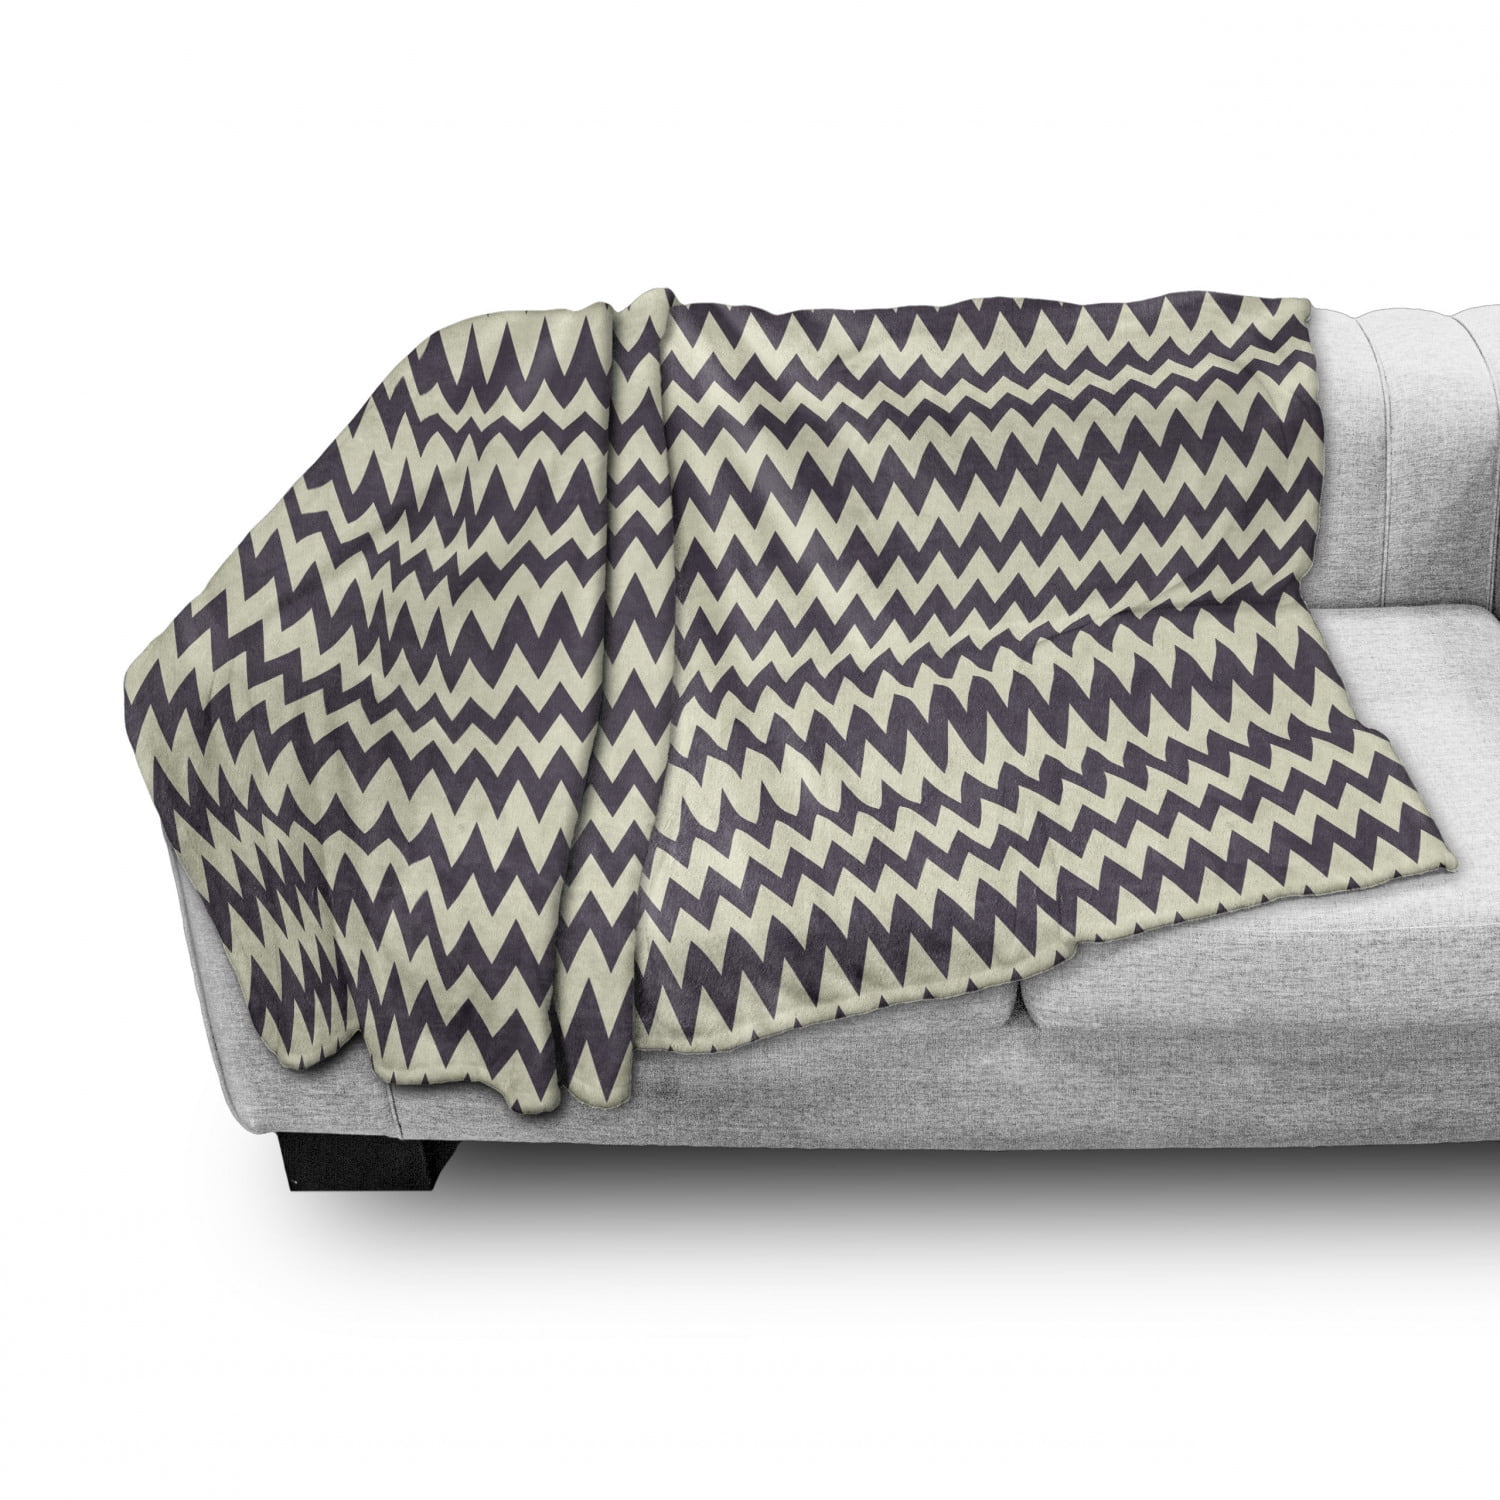 Flannel Fleece Accent Piece Soft Couch Cover for Adults Horizontal Narrow Sharp Edged Zig Zags Classical Simplistic with Retro Effects Dark Blue Cream 50 x 60 Ambesonne Chevron Throw Blanket